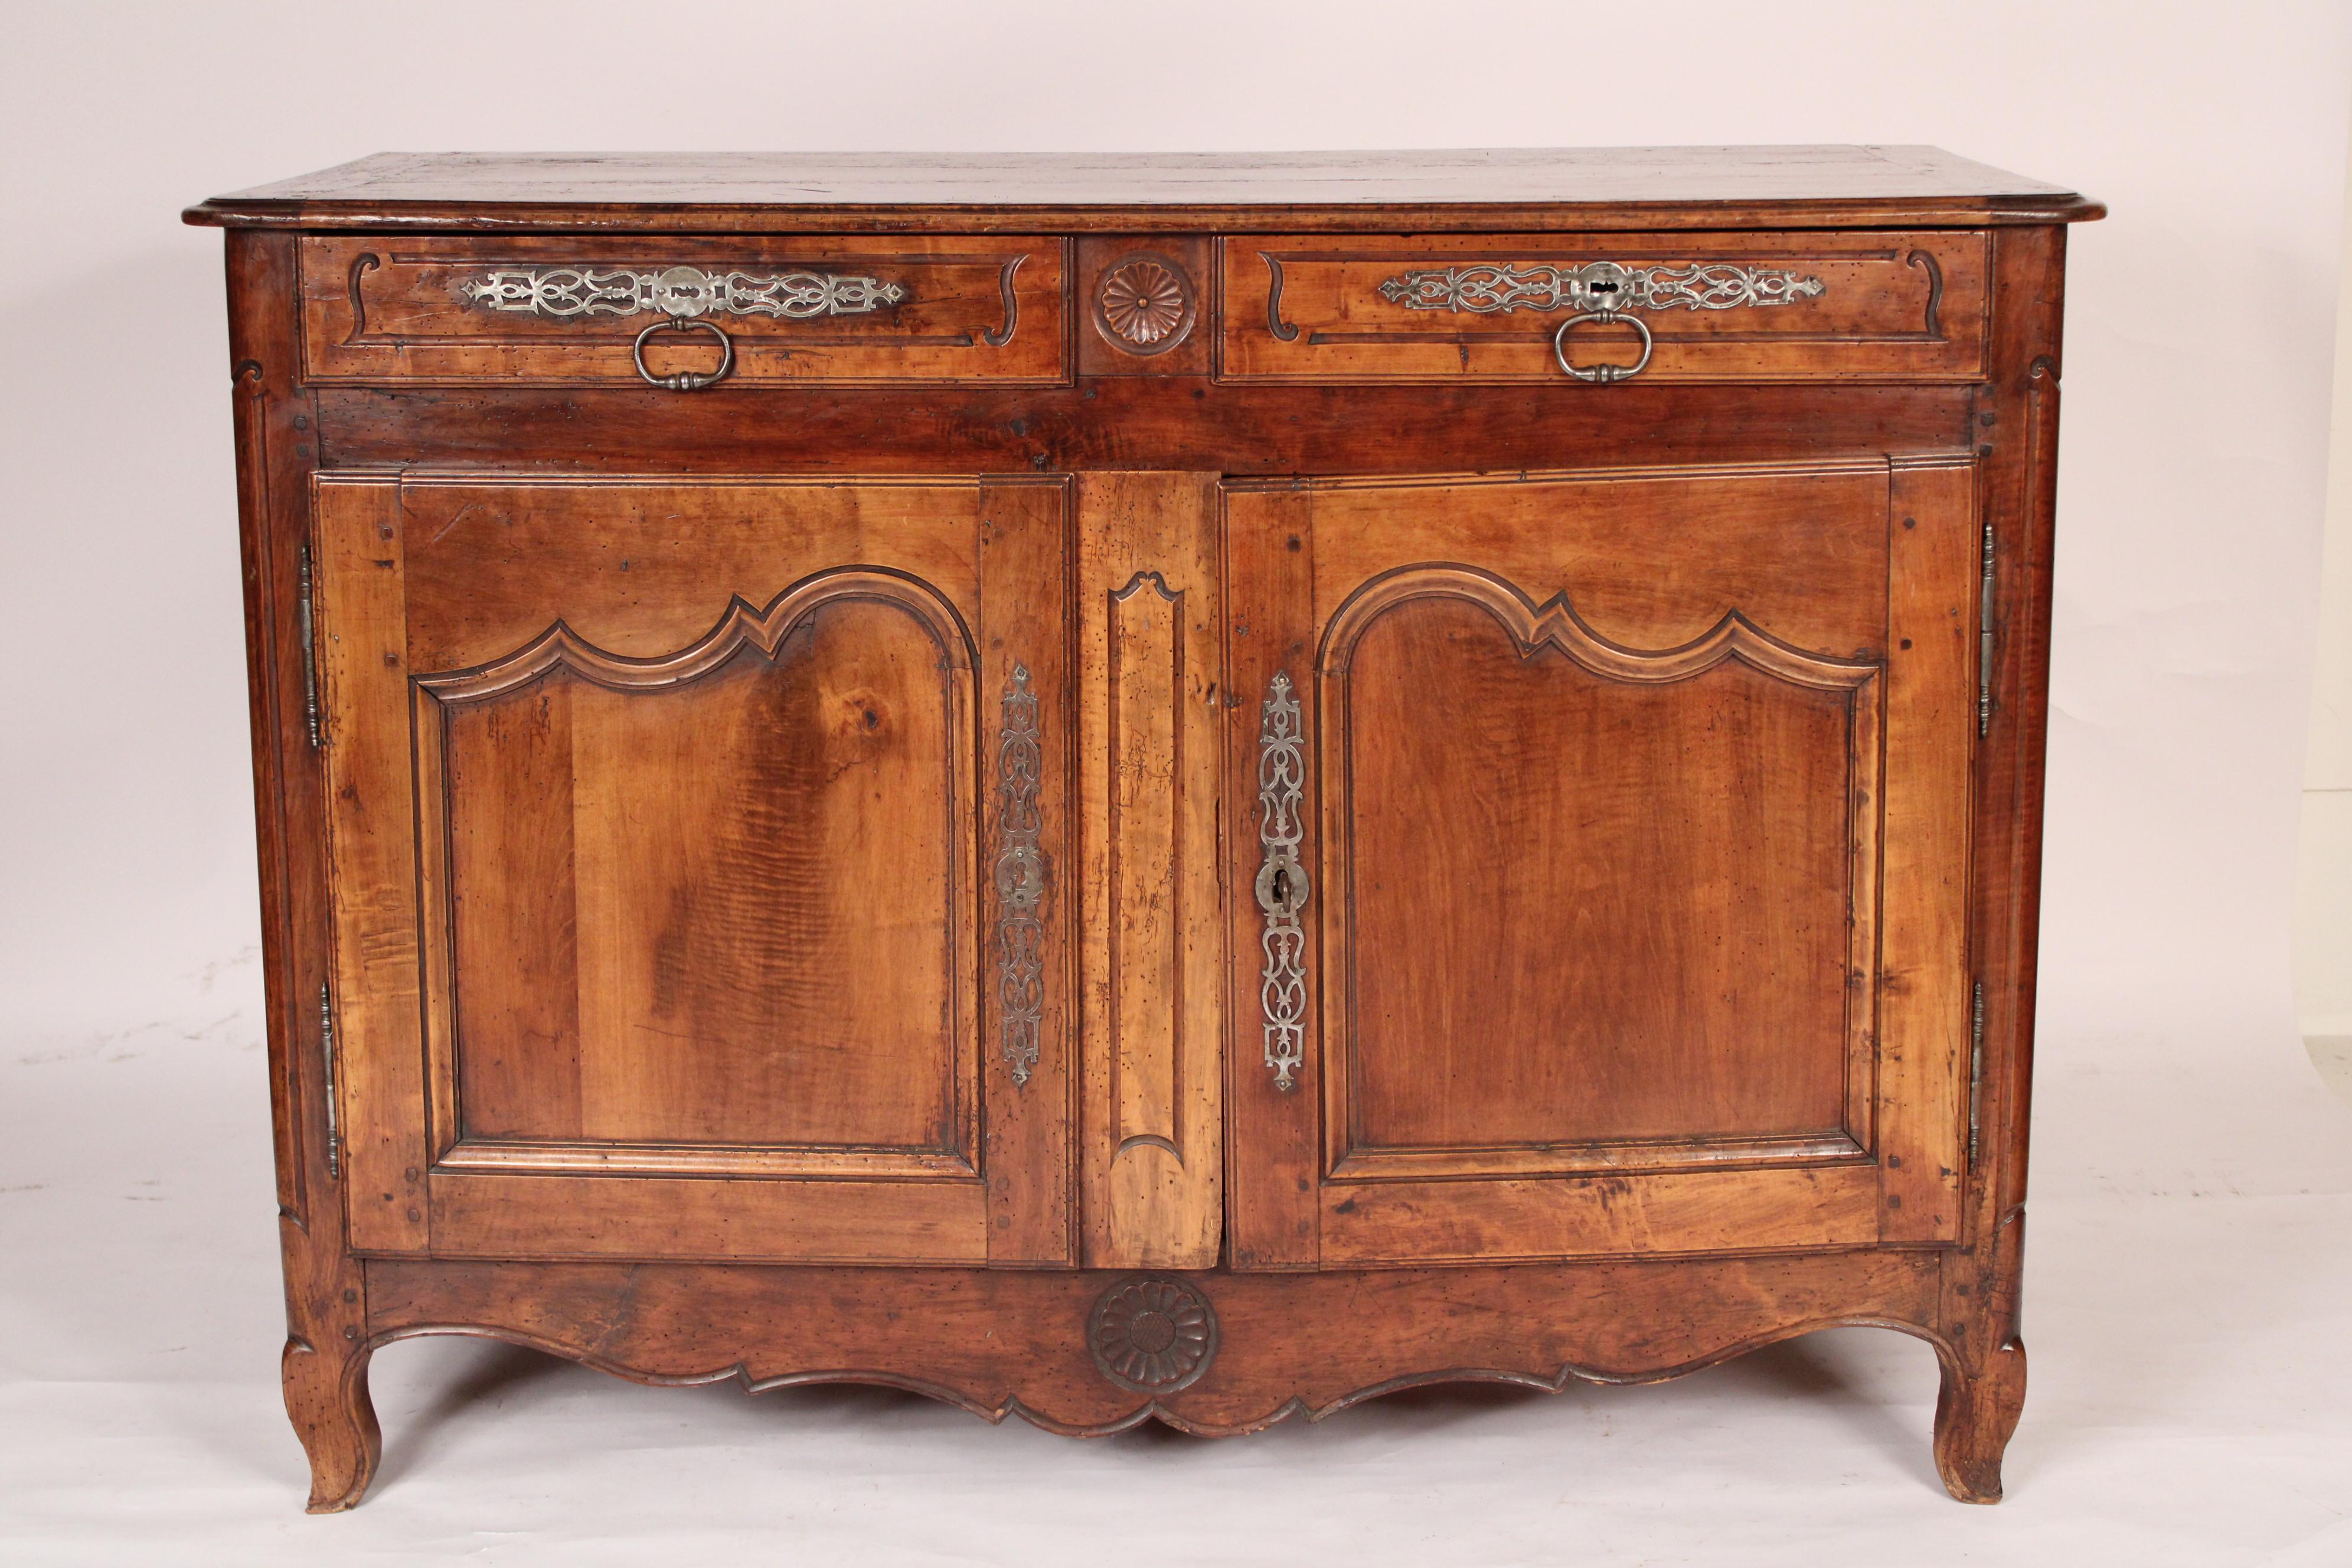 Louis XV provincial fruit wood buffet, 18th century. With a rectangular overhanging top with thumb molded front and side edges and rounded front corners over two drawers with steel hardware over two doors with inset panels, a shaped apron with